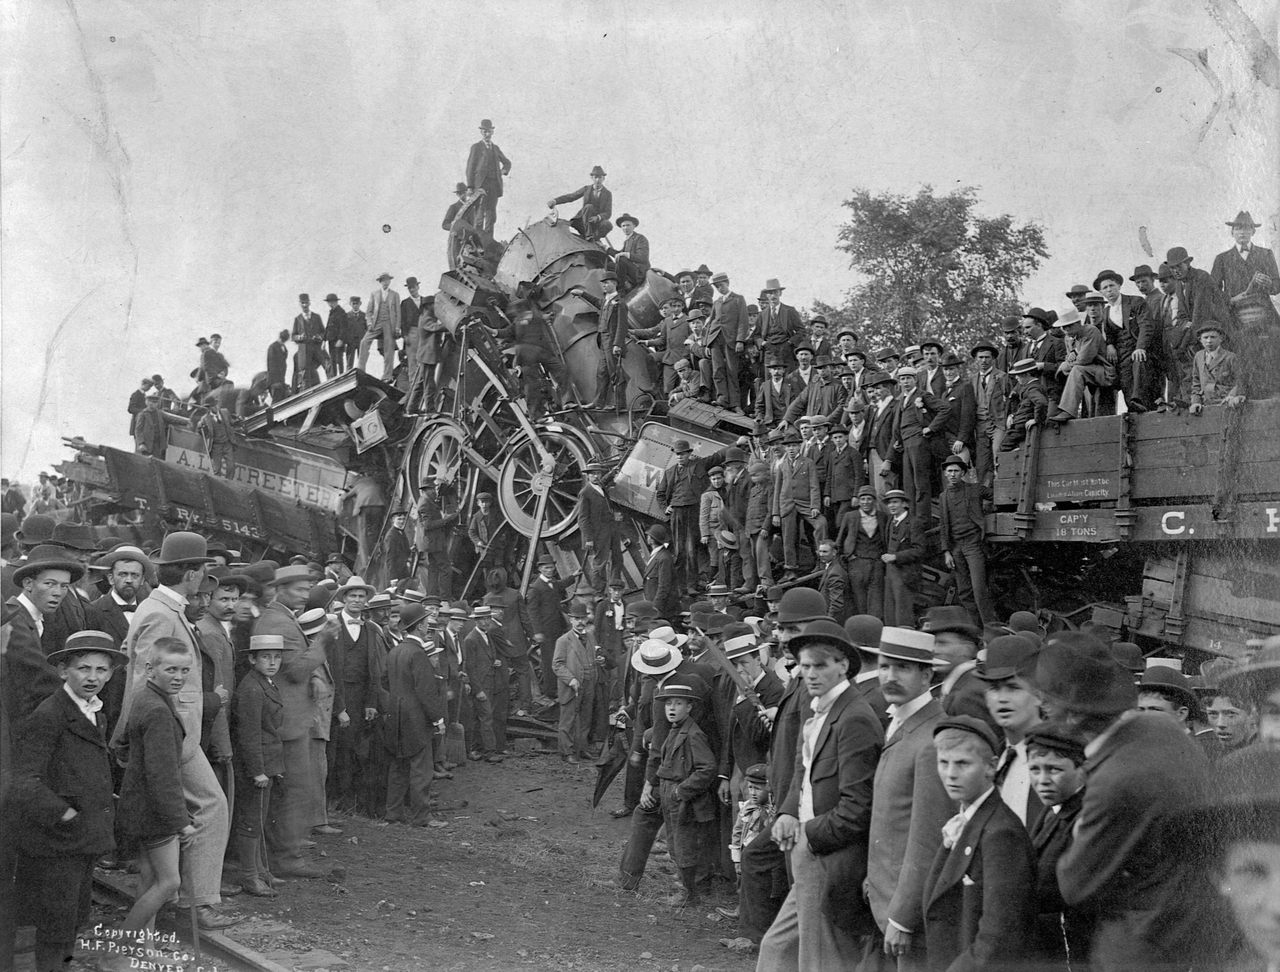 A crowd swarms over the wreckage to claim souvenirs in Buckeye Park in Ohio after a staged train wreck in 1896. 